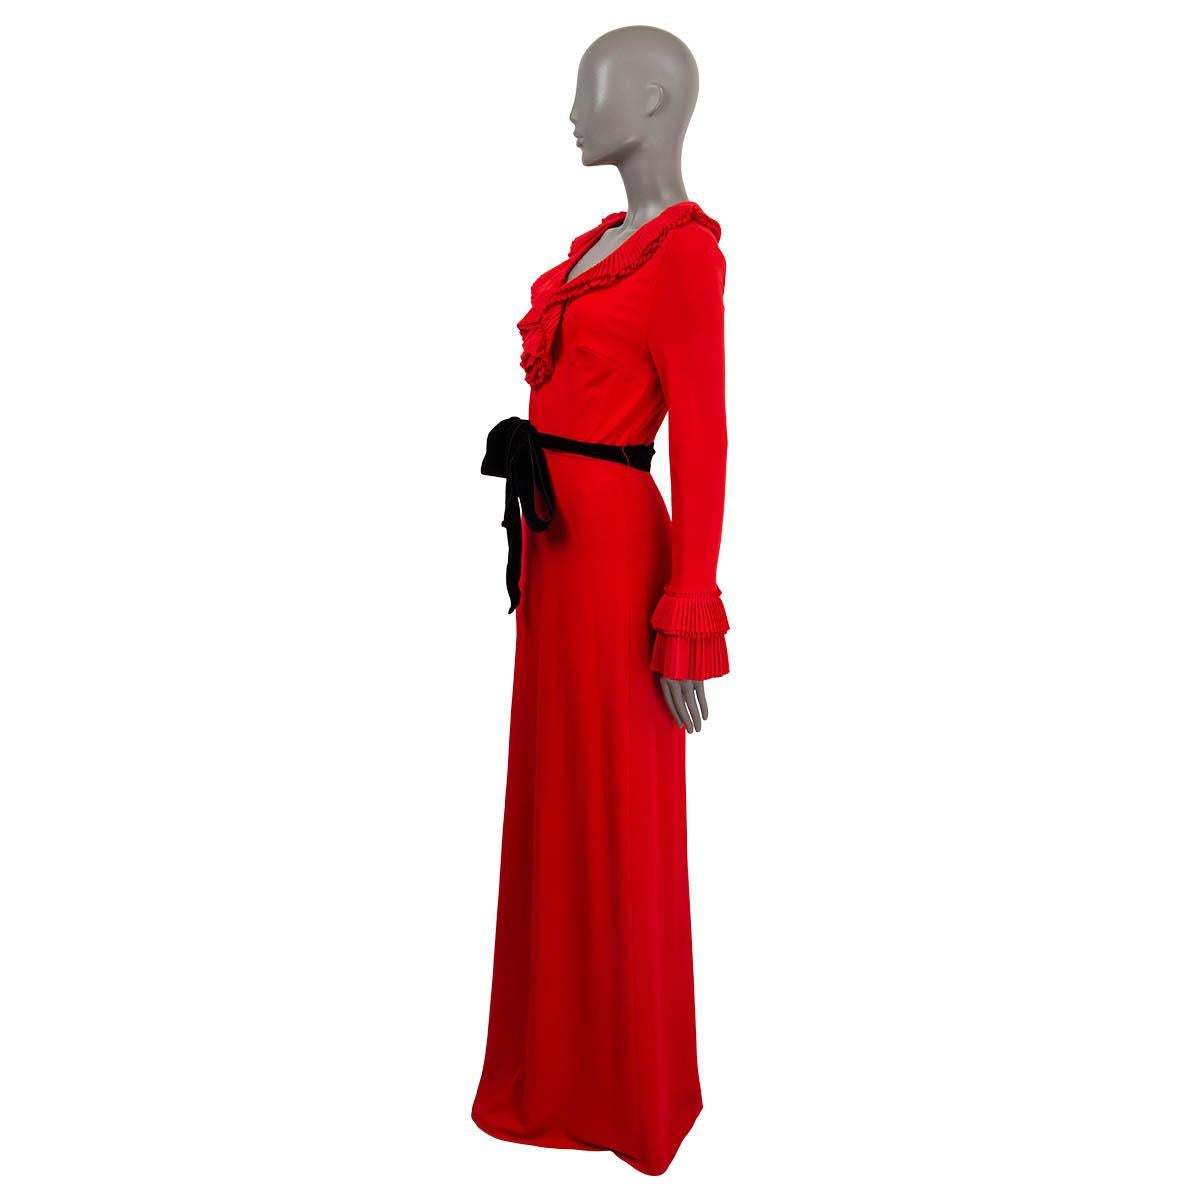 100% authentic Gucci long sleeve jersey gown in viscose (98%) and elastane (2%) with ruffled details on neckline and cuffs. The design features a black velvet ribbon waist belt. Opens with a zipped back. Unlined bottom part. Has been worn and is in